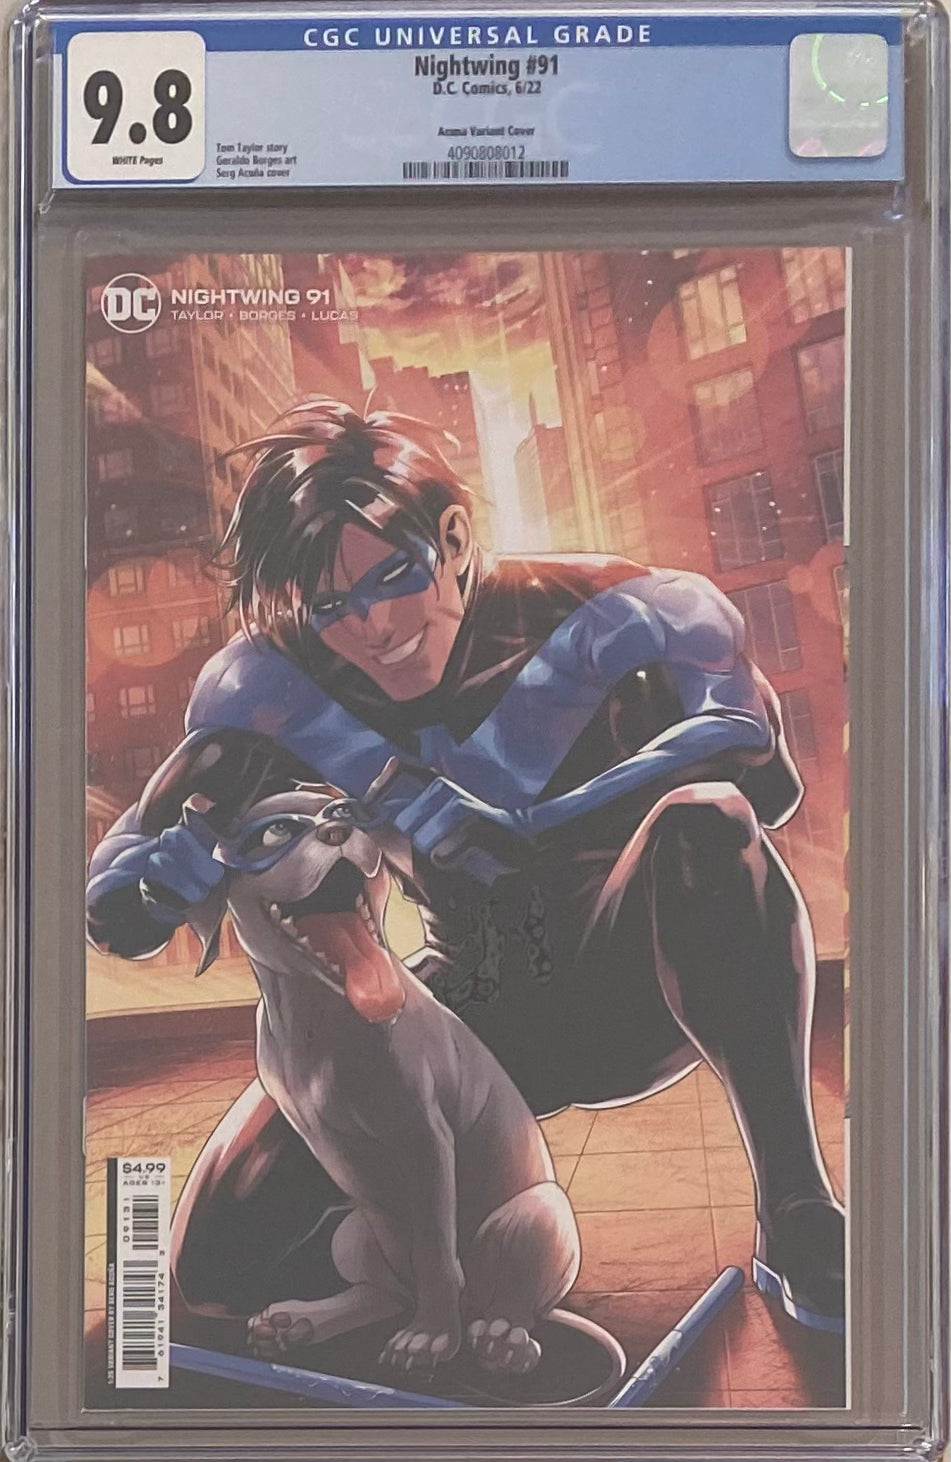 Nightwing #91 Acuna 1:25 Retailer Incentive Variant CGC 9.8